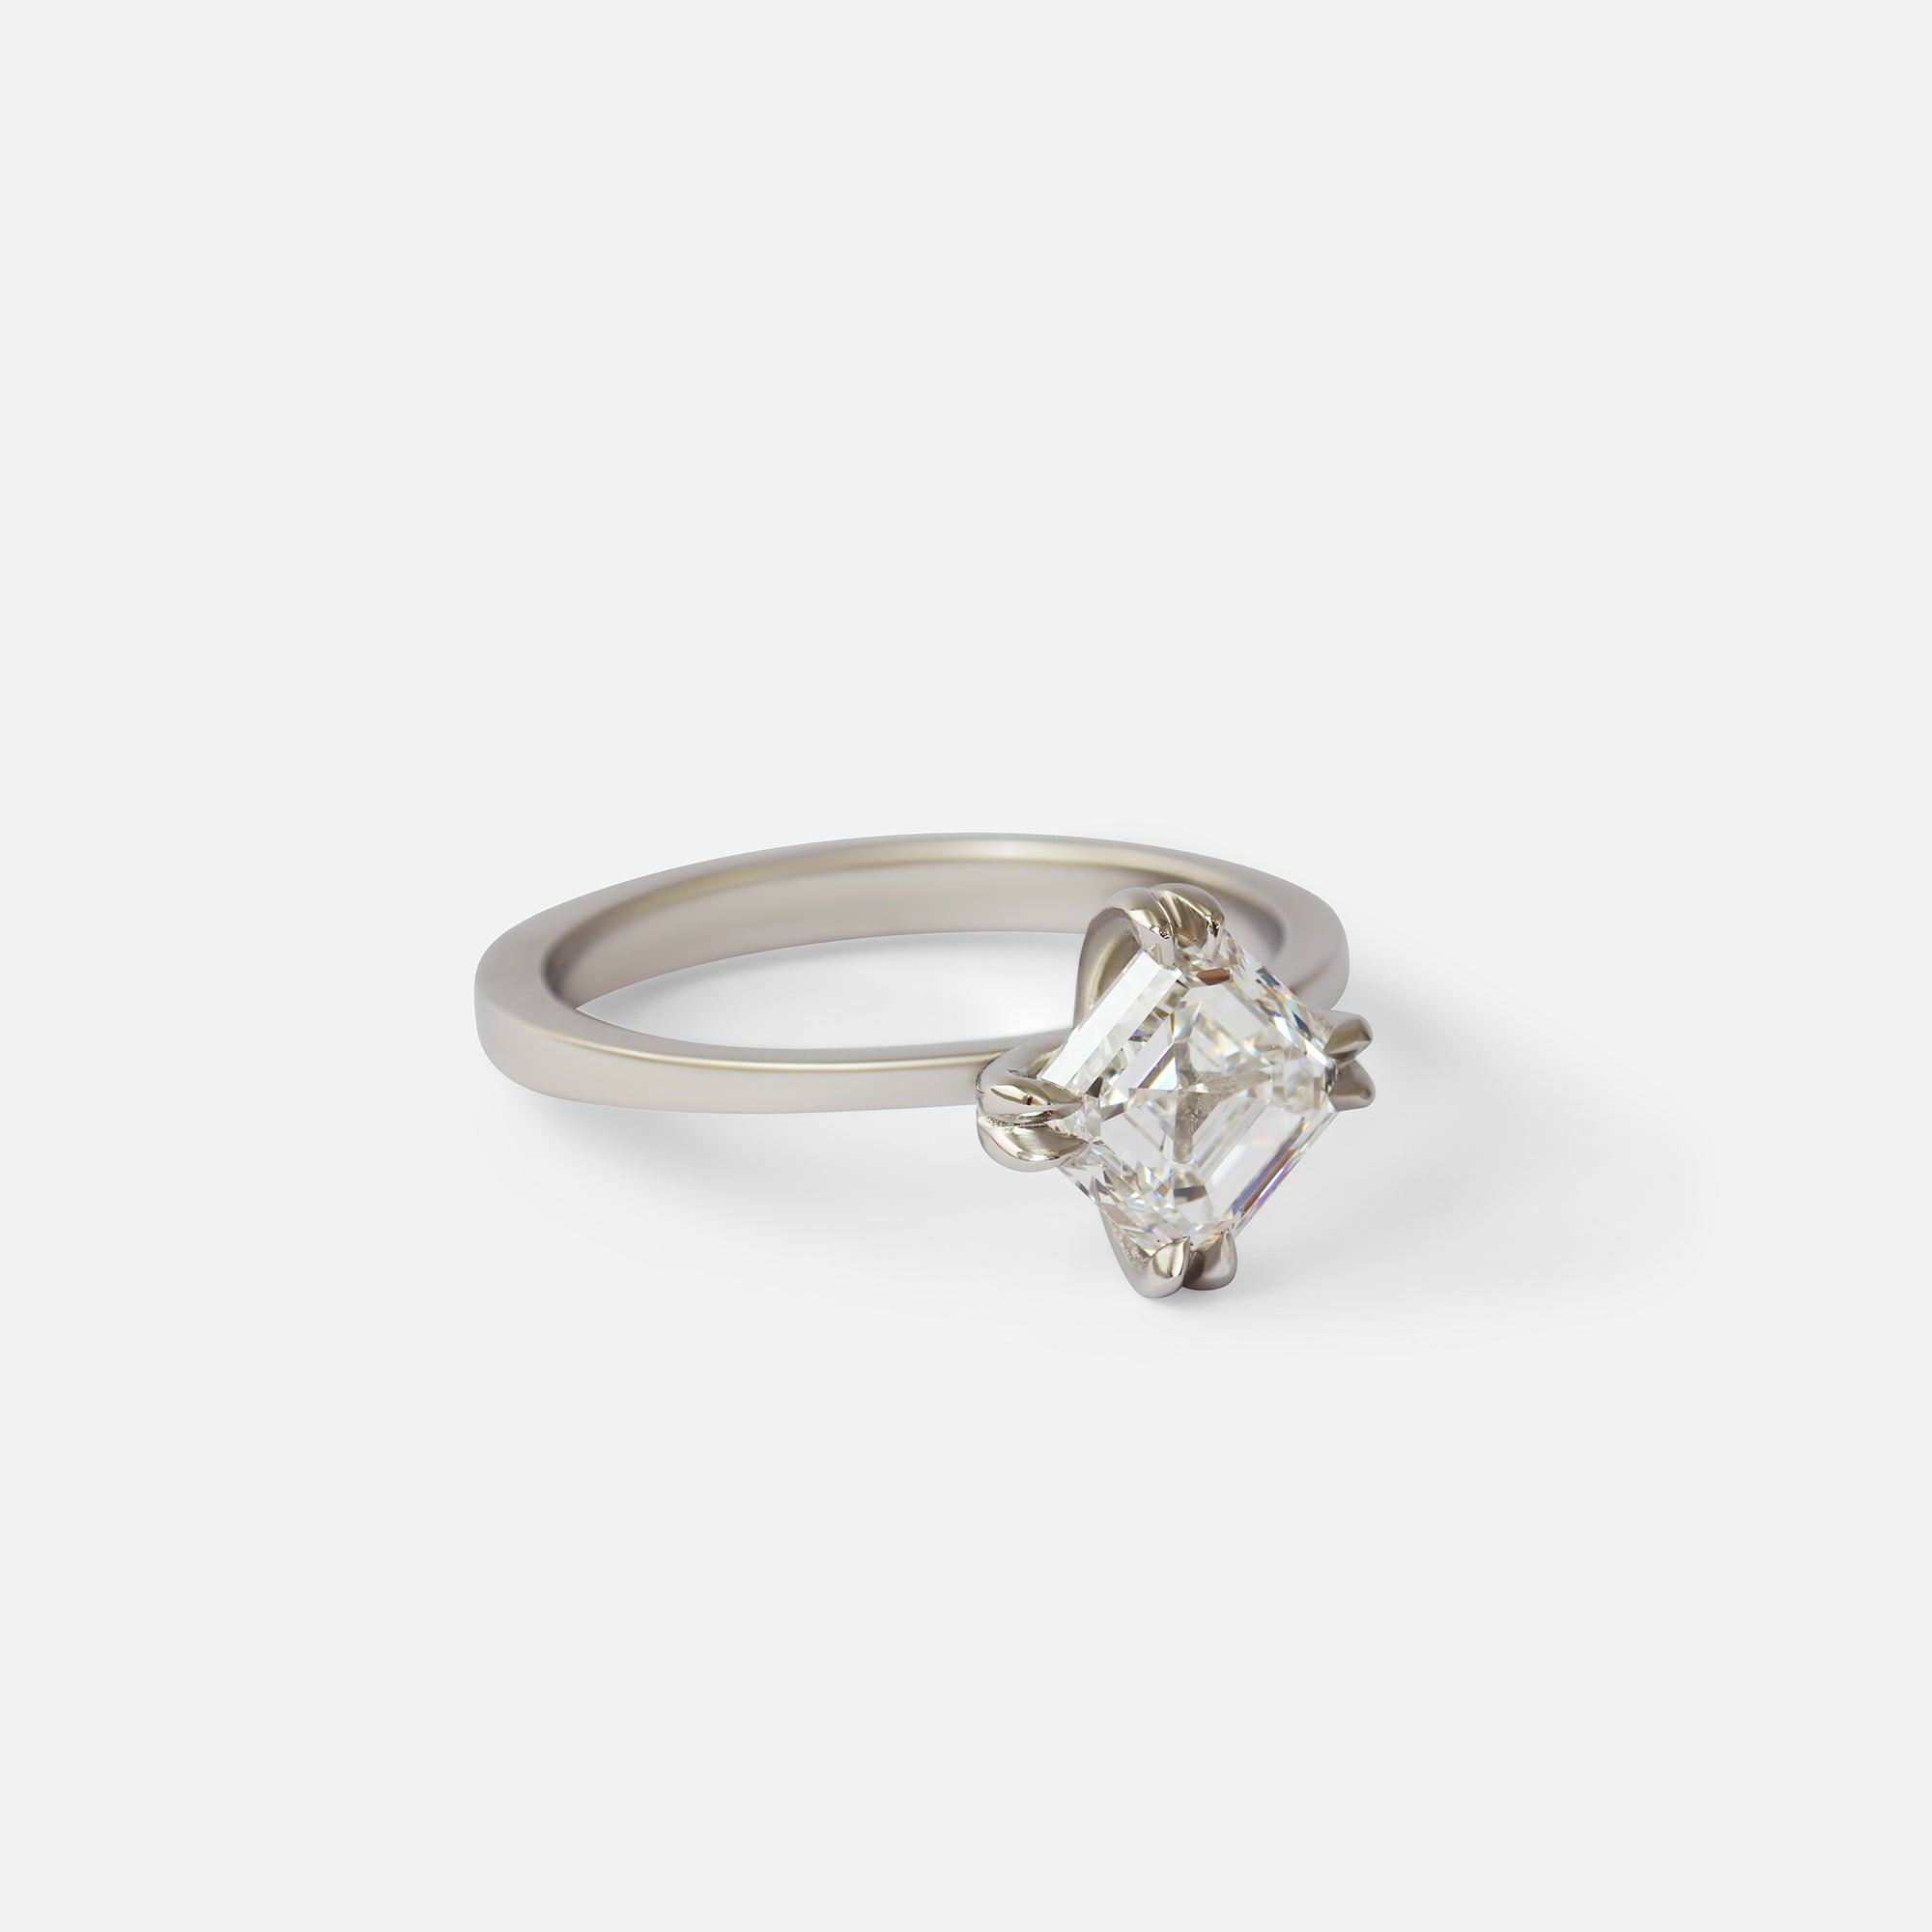 Ash / Asscher Cut Diamond Ring By fitzgerald jewelry in Engagement Rings Category